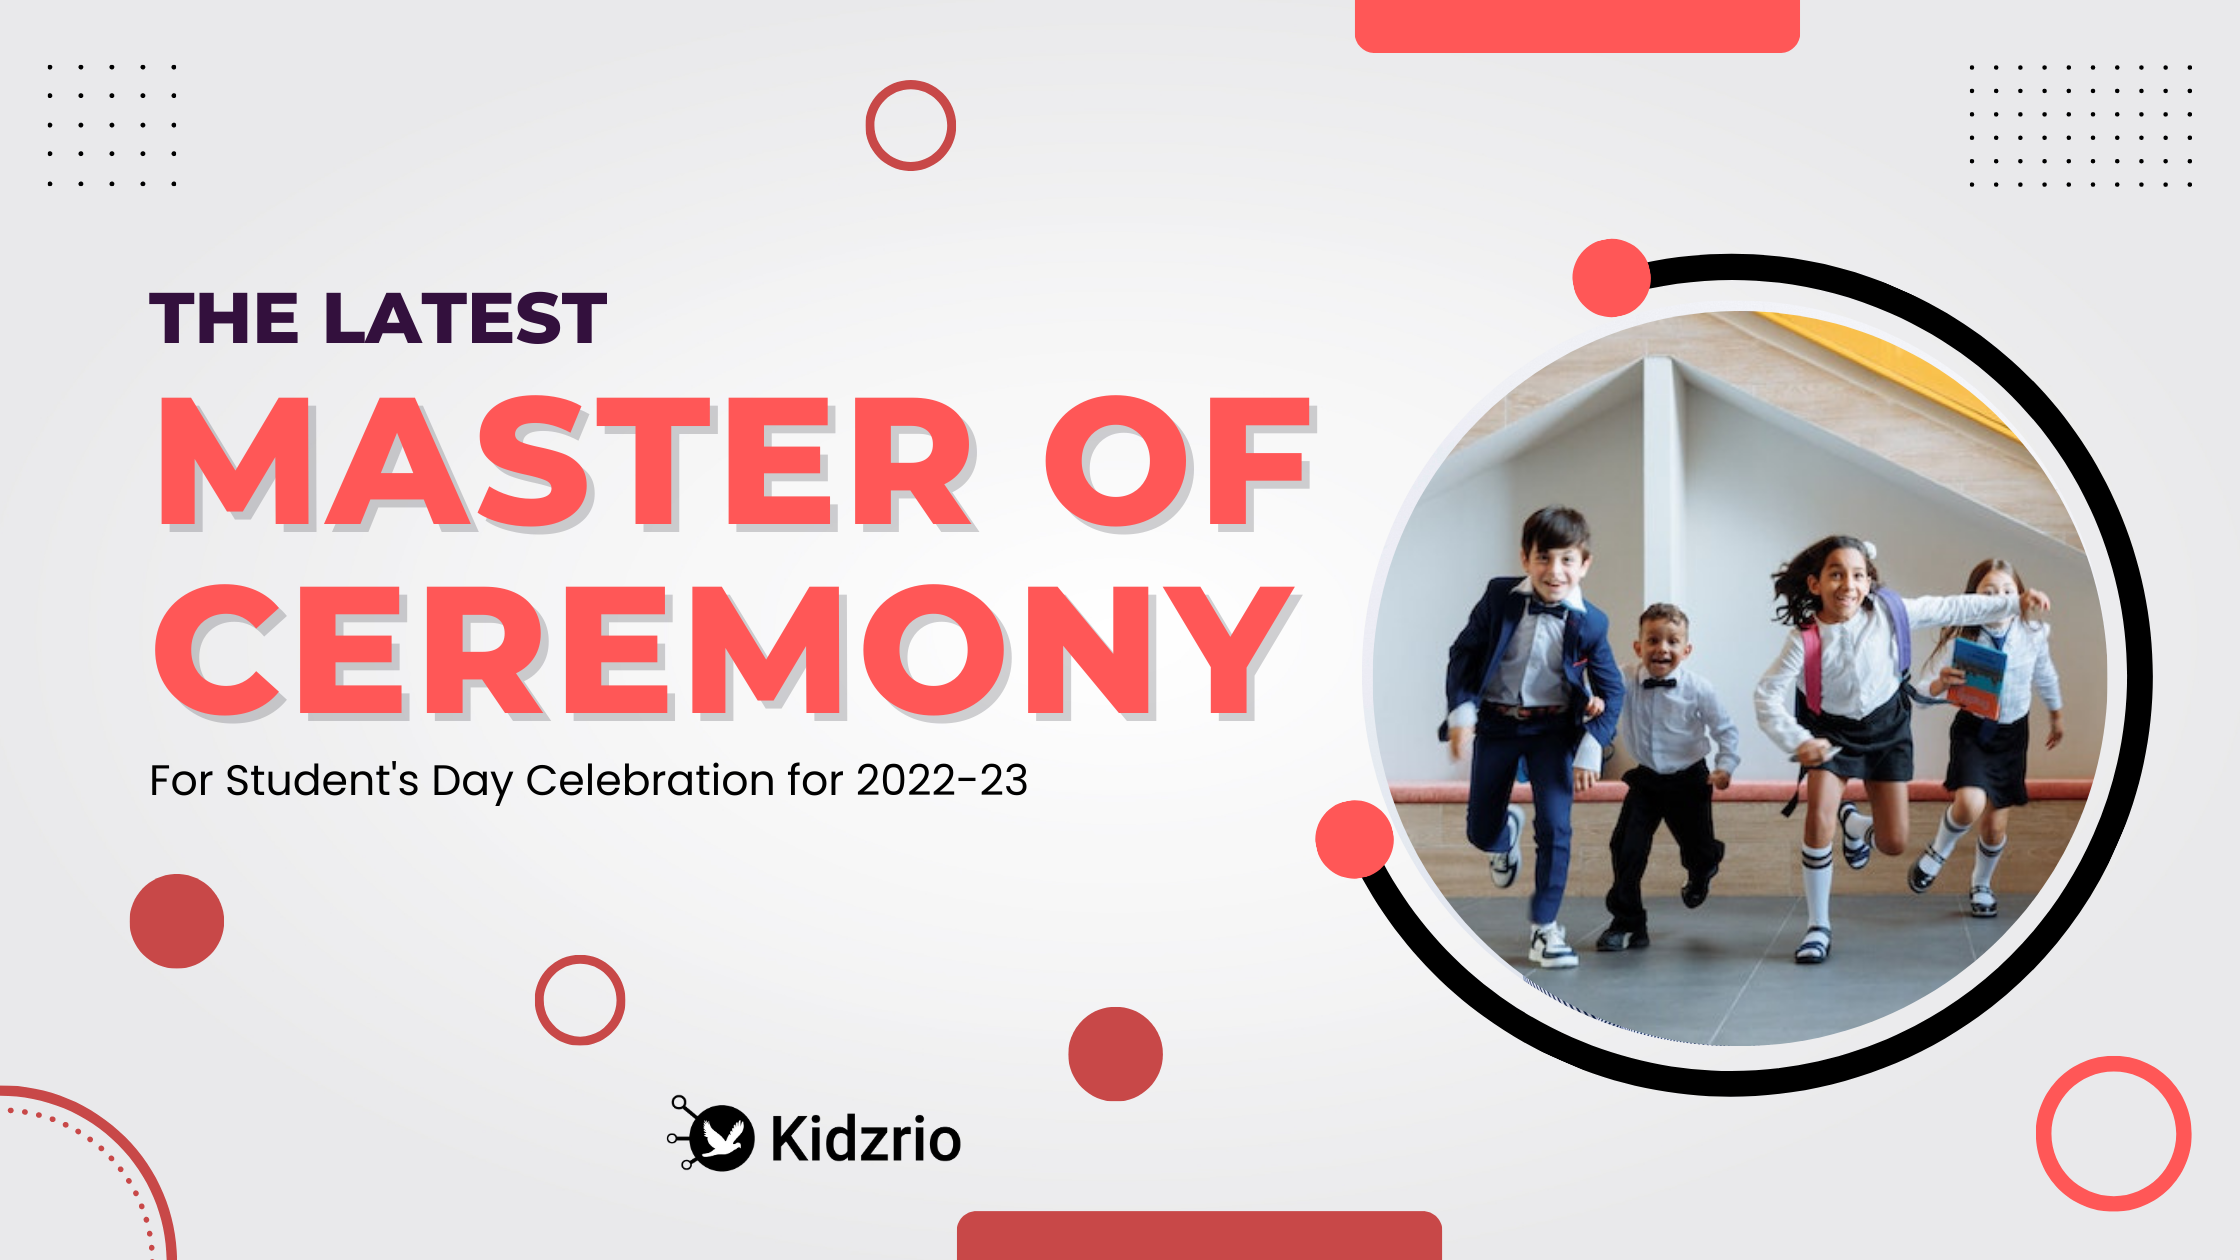 Master of Ceremony for Student's Day Celebration 2022-23